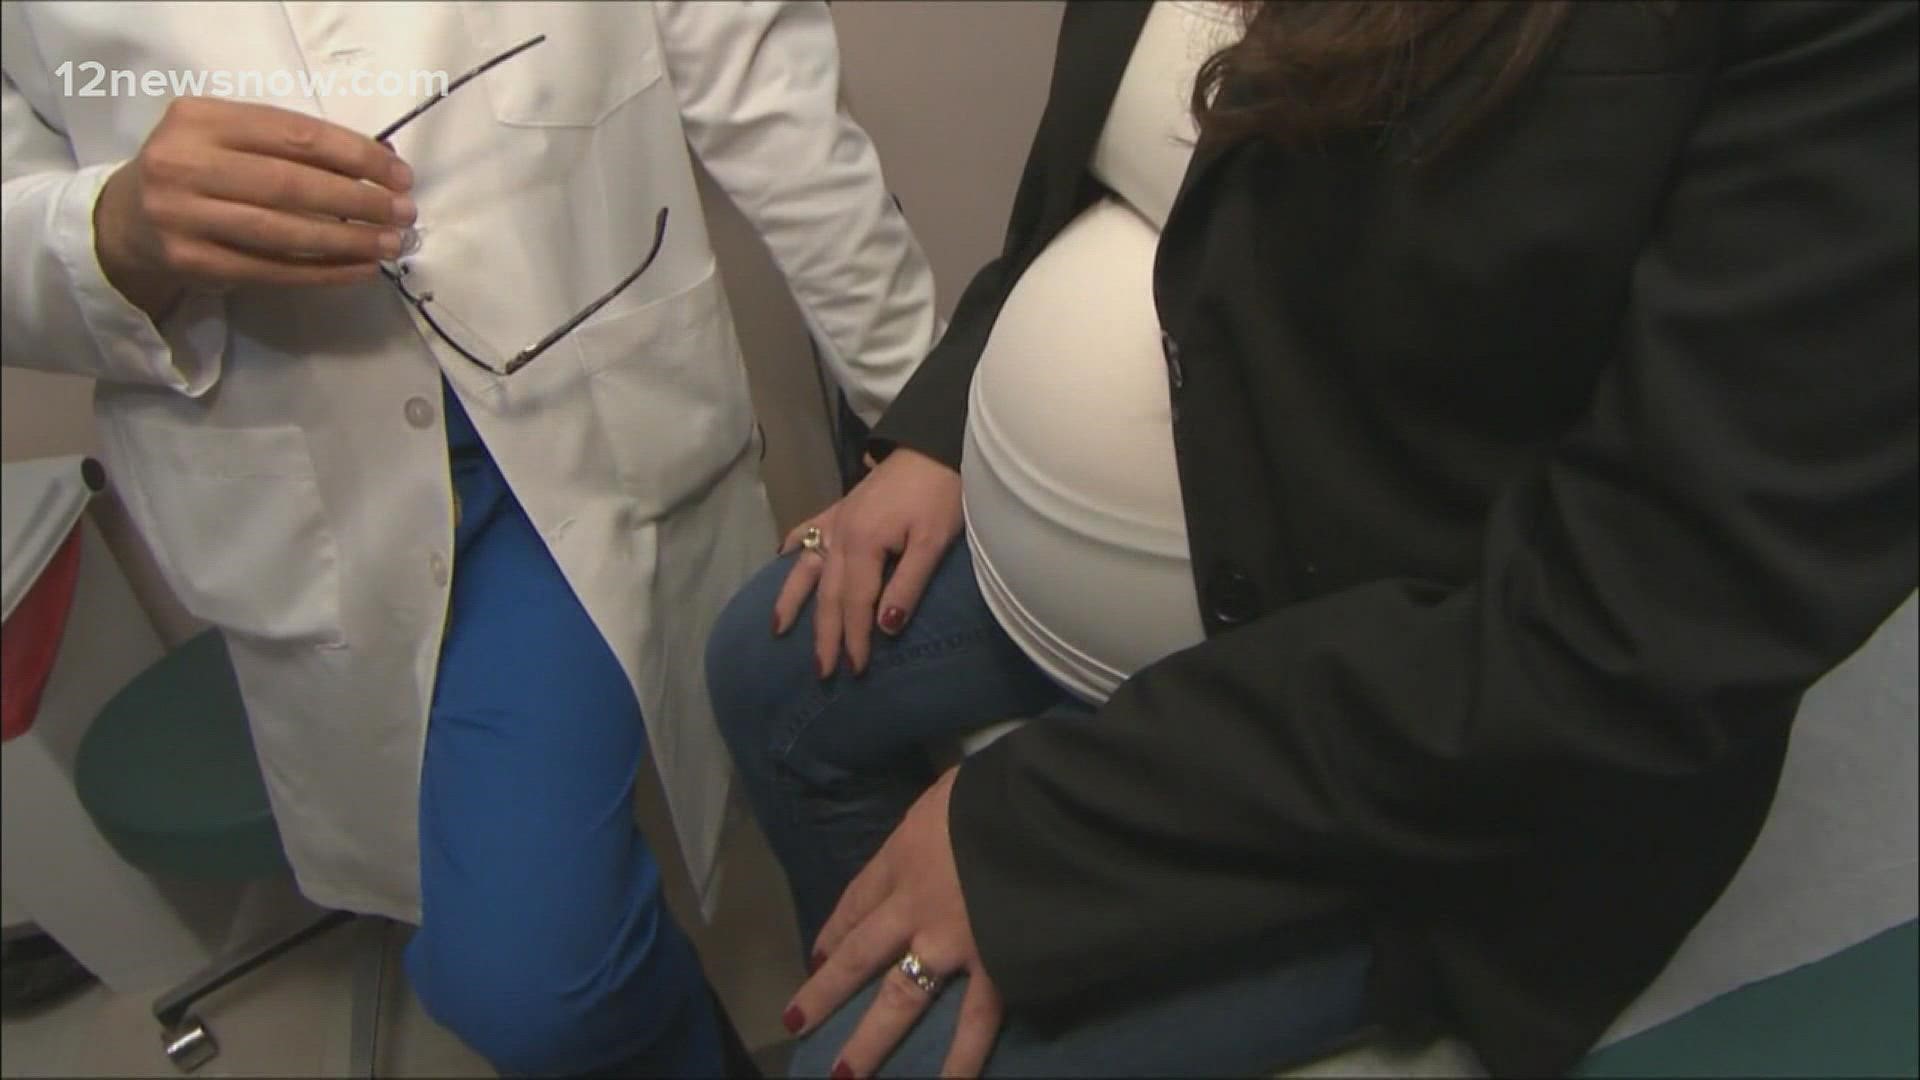 The two groups said vaccinations have proven to be safe and effective for pregnant women.